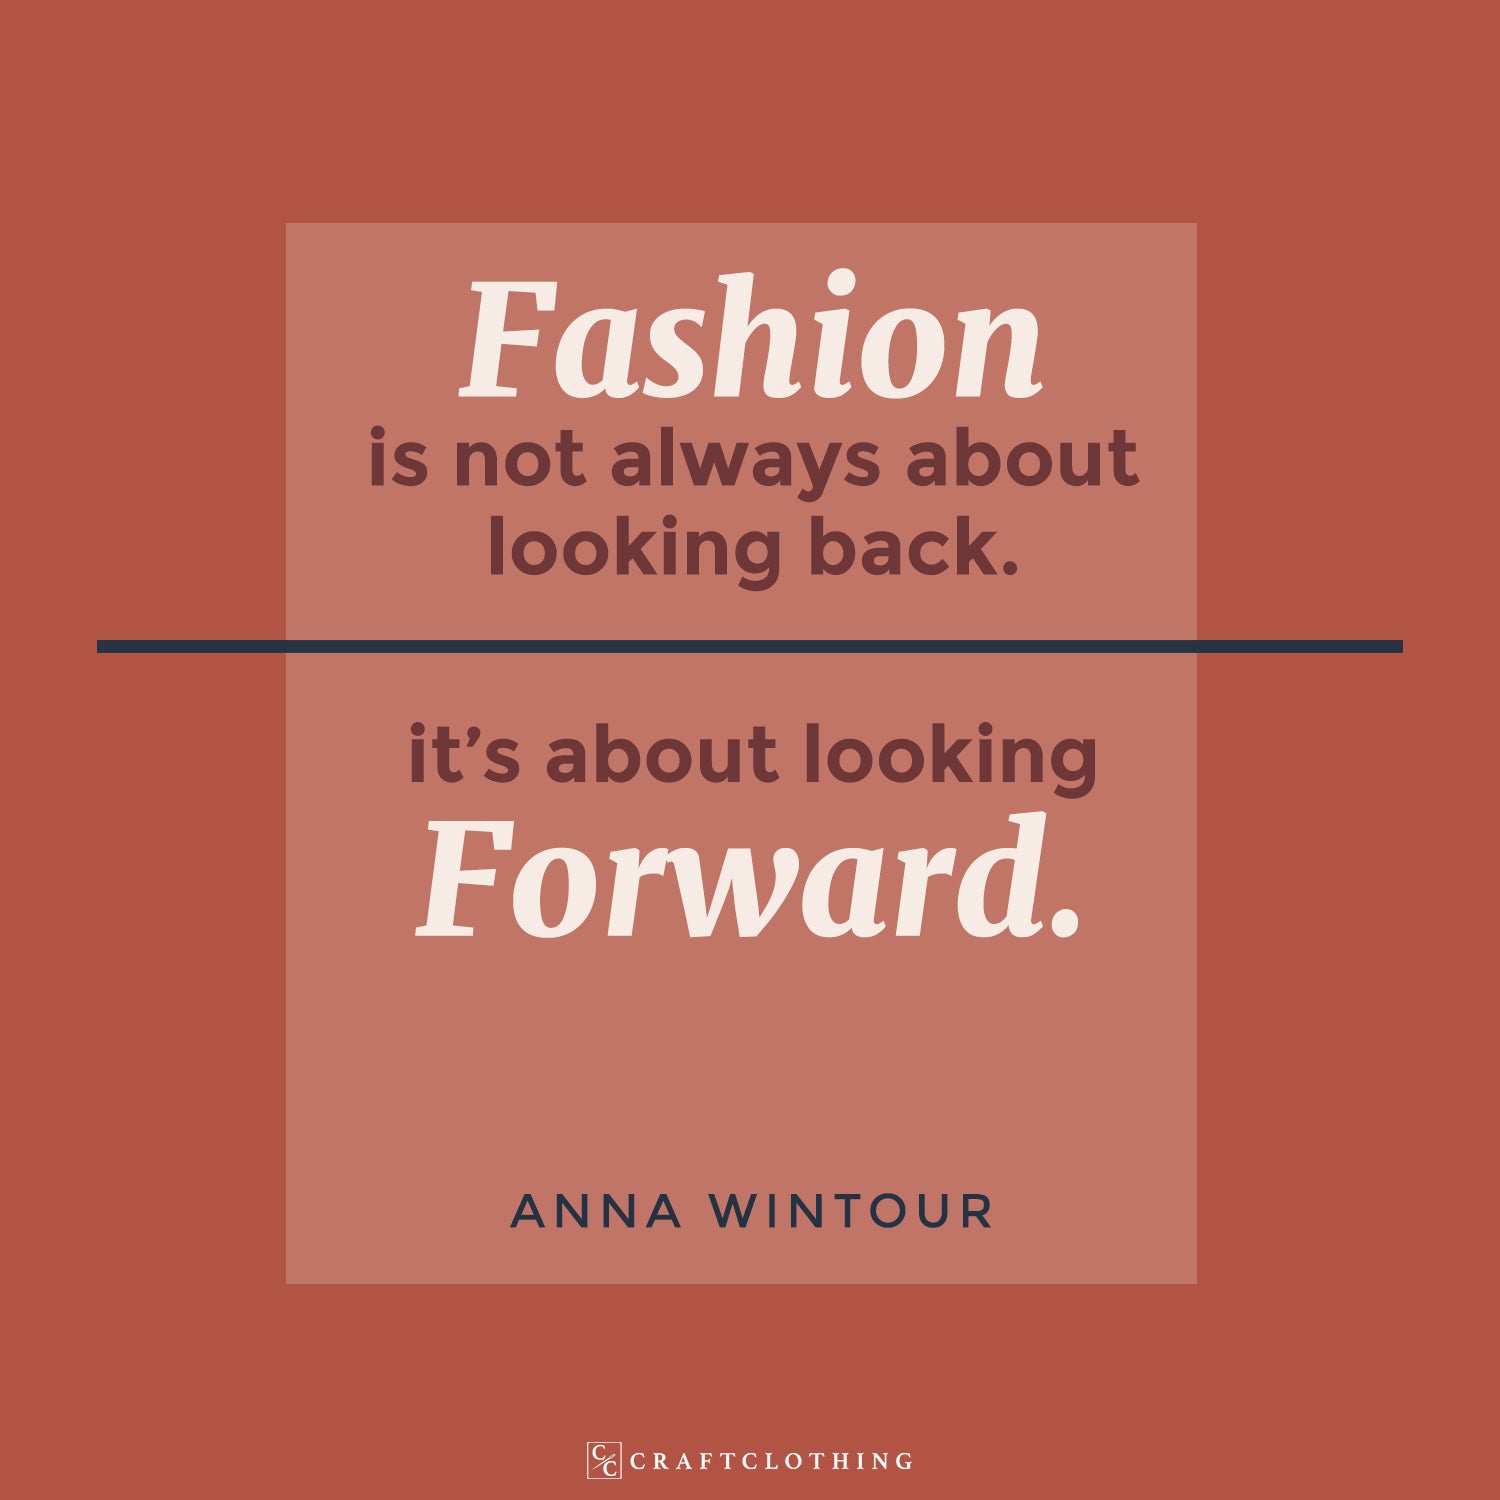 Fashion is not always about looking back. It's also about looking Forward.